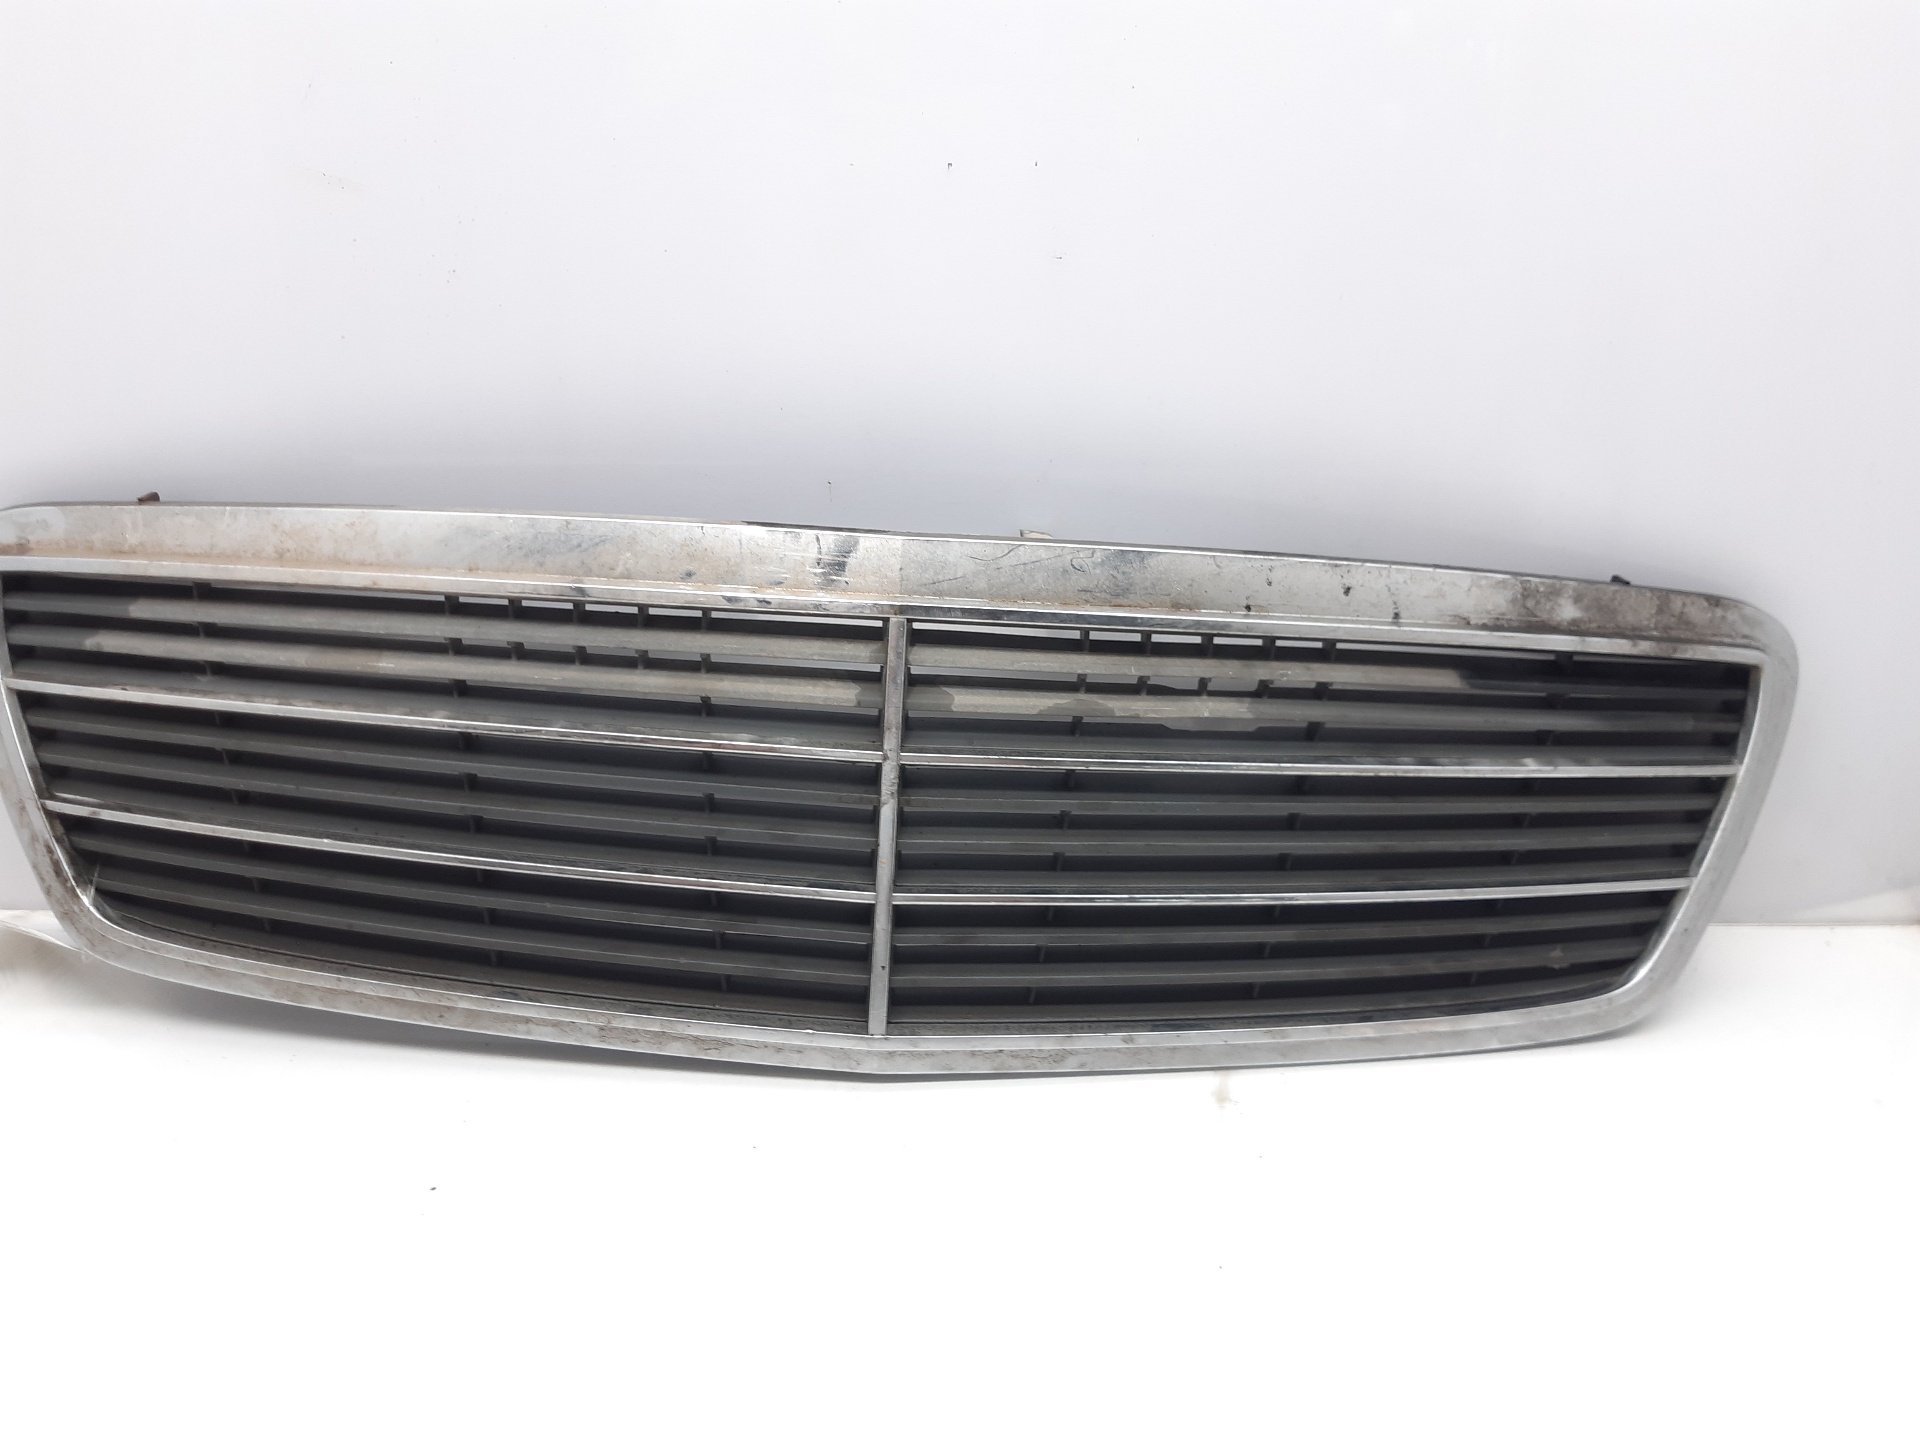 MERCEDES-BENZ C-Class W203/S203/CL203 (2000-2008) Radiator Grille 2038800483 20164764